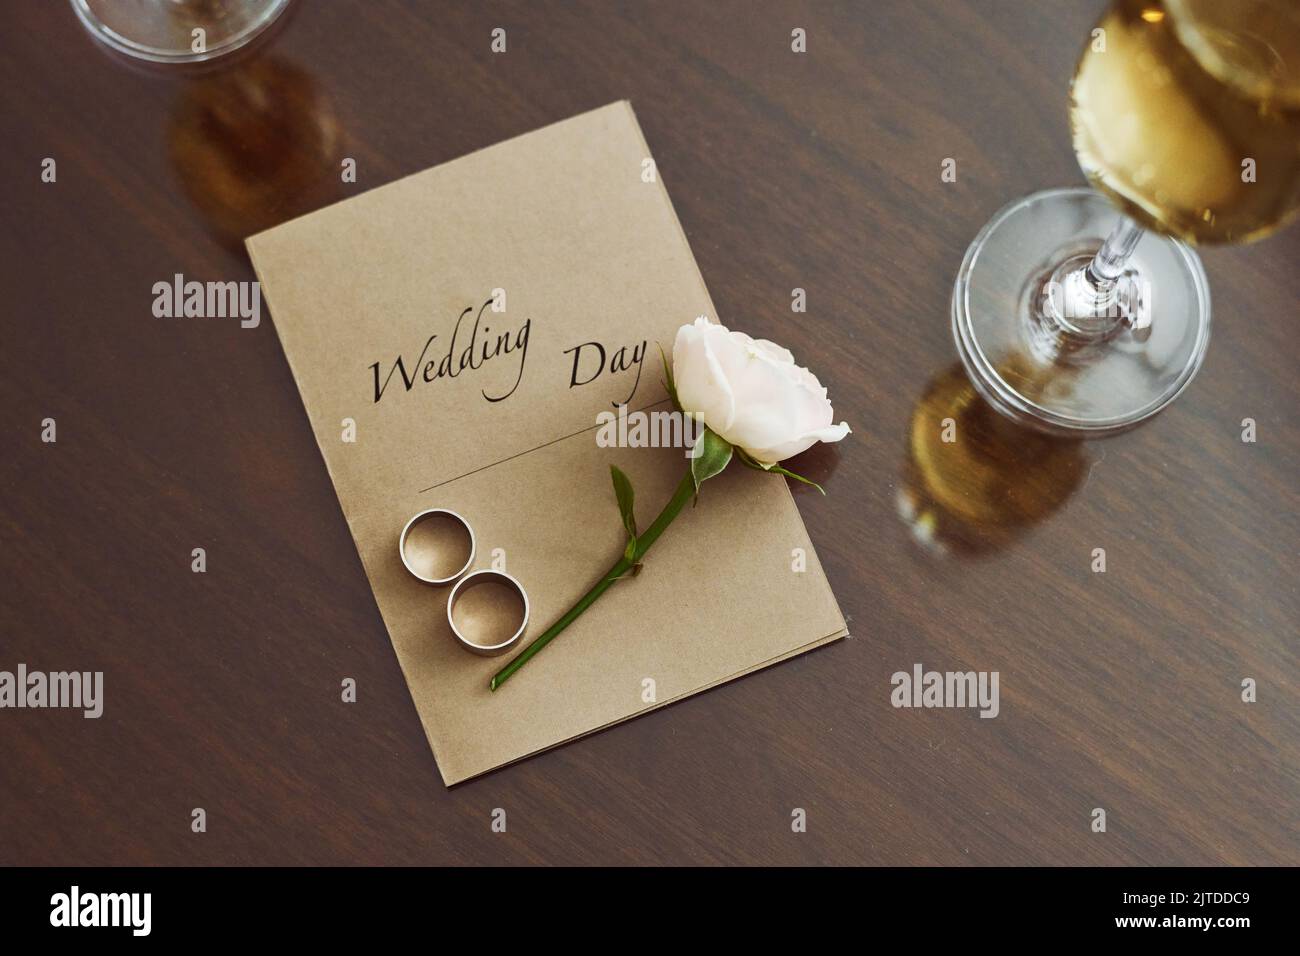 Top view of wedding composition on table consisting of invitation, fresh white rose and two rings surrounded by flutes of champagne Stock Photo